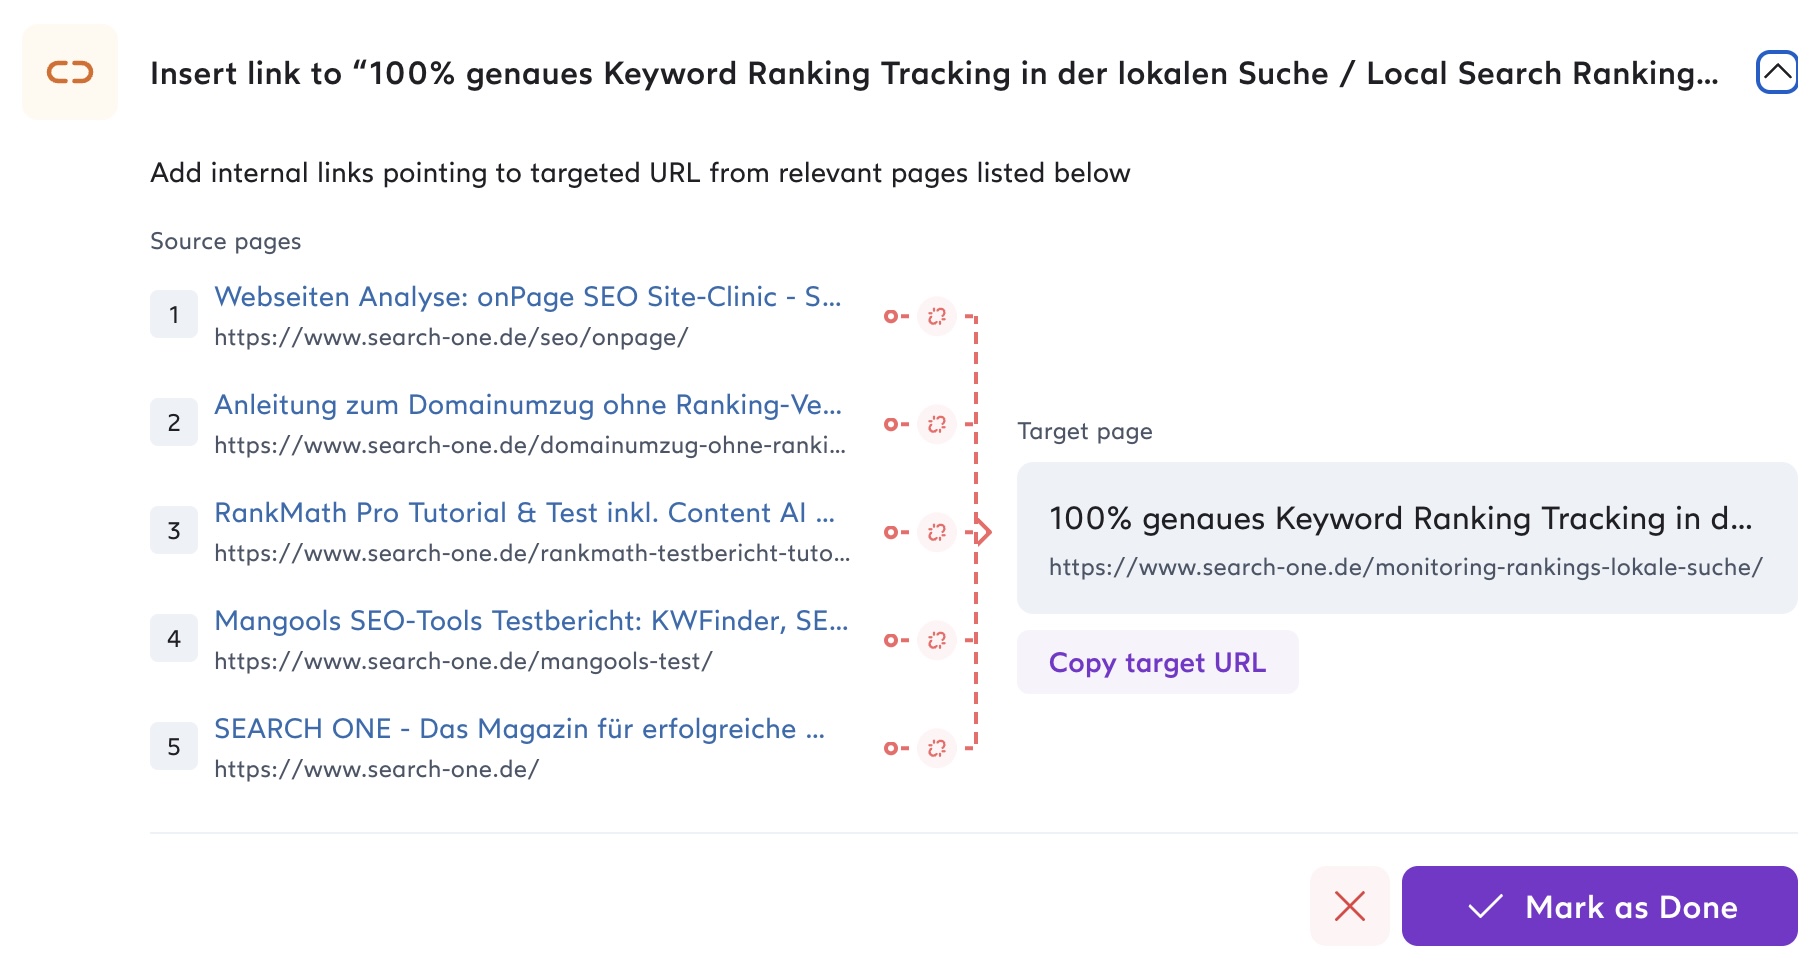 Add internal links pointing to targeted URL from relevant pages listed below